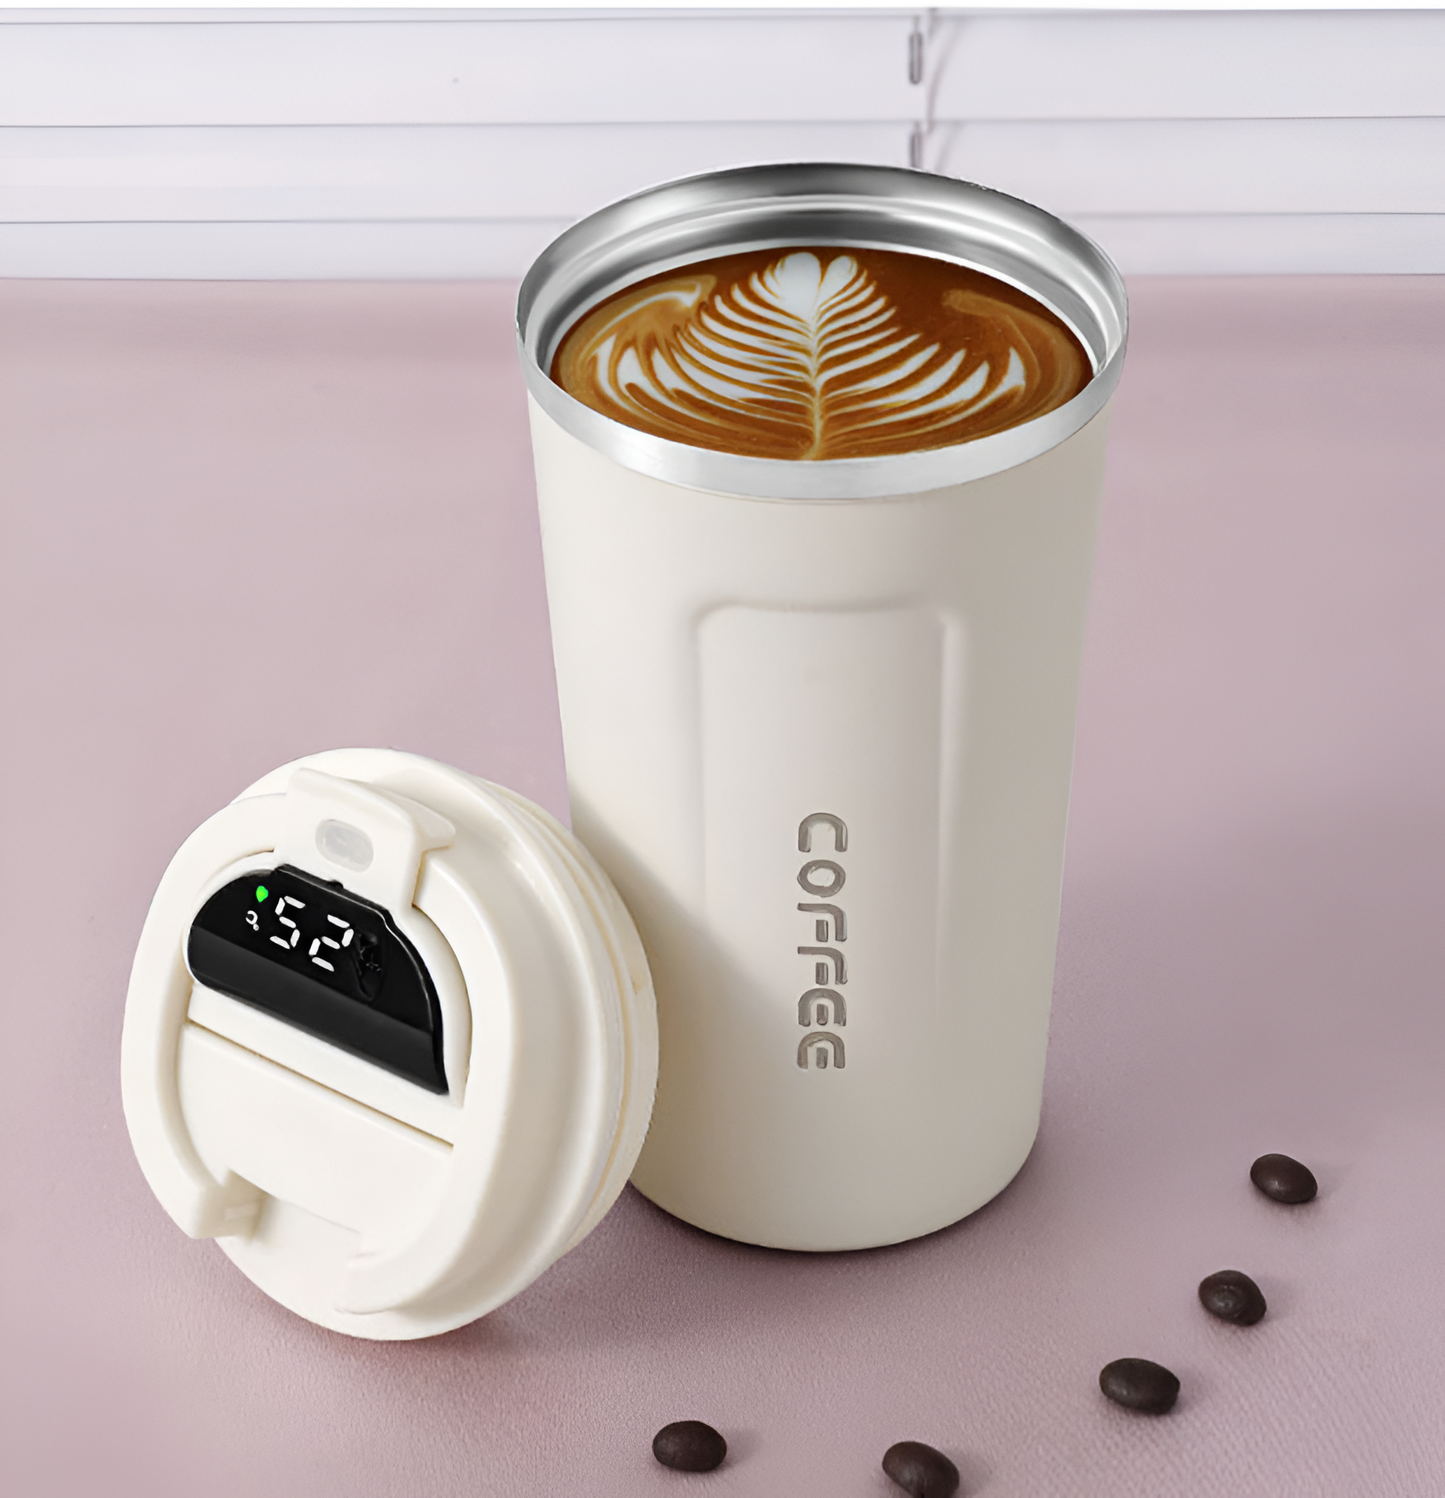 BrewMate 304: Sleek Stainless Steel Thermos with LCD Display